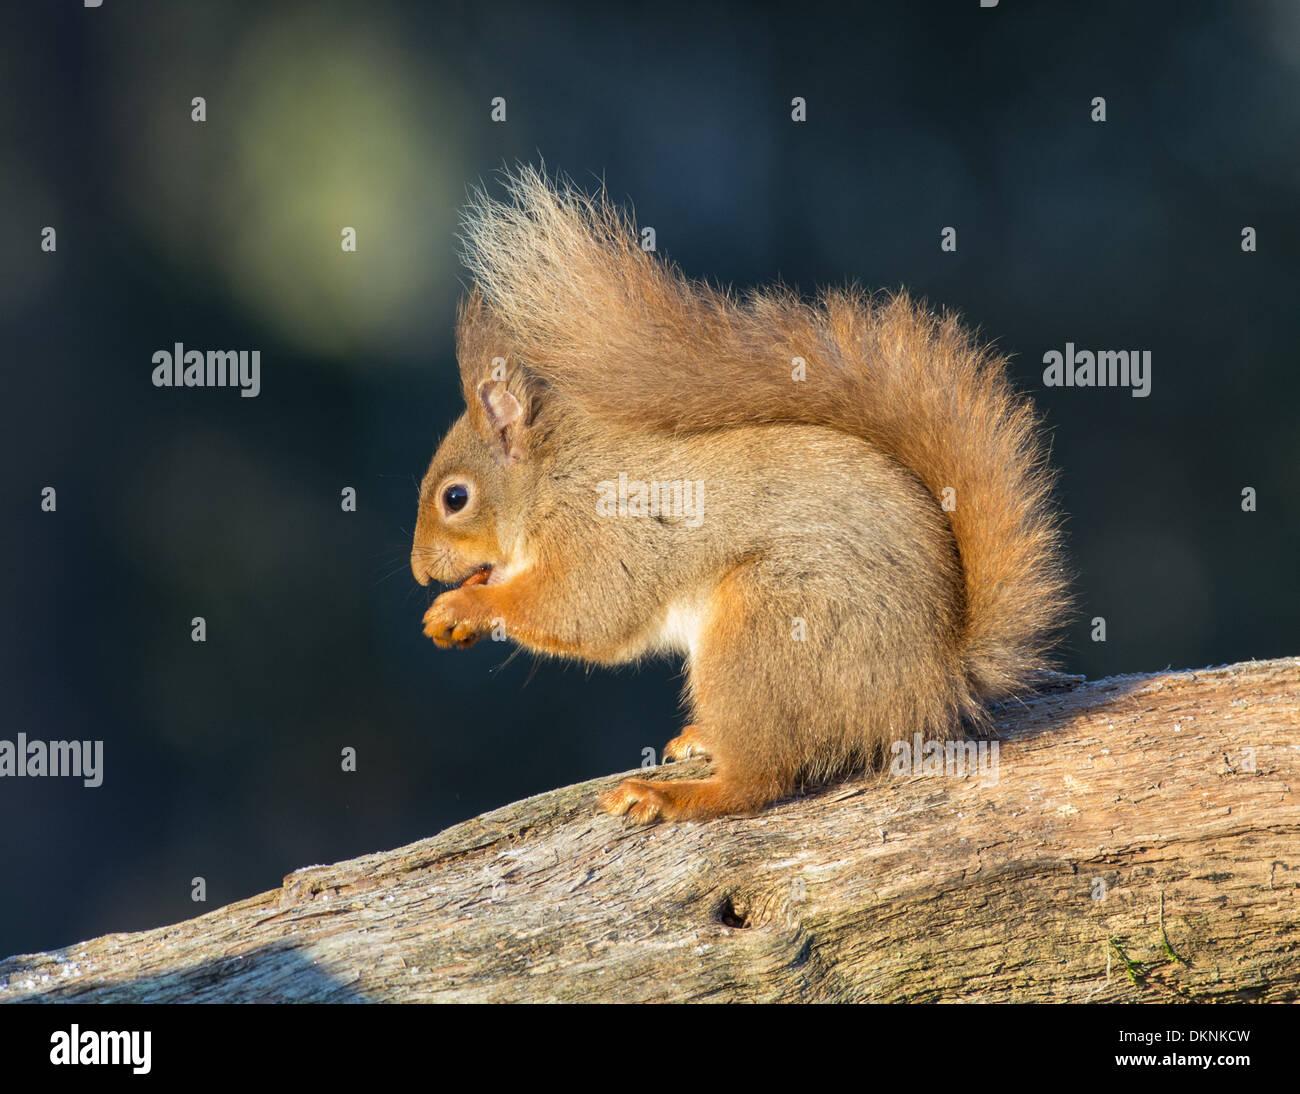 Red squirrel on branch Stock Photo